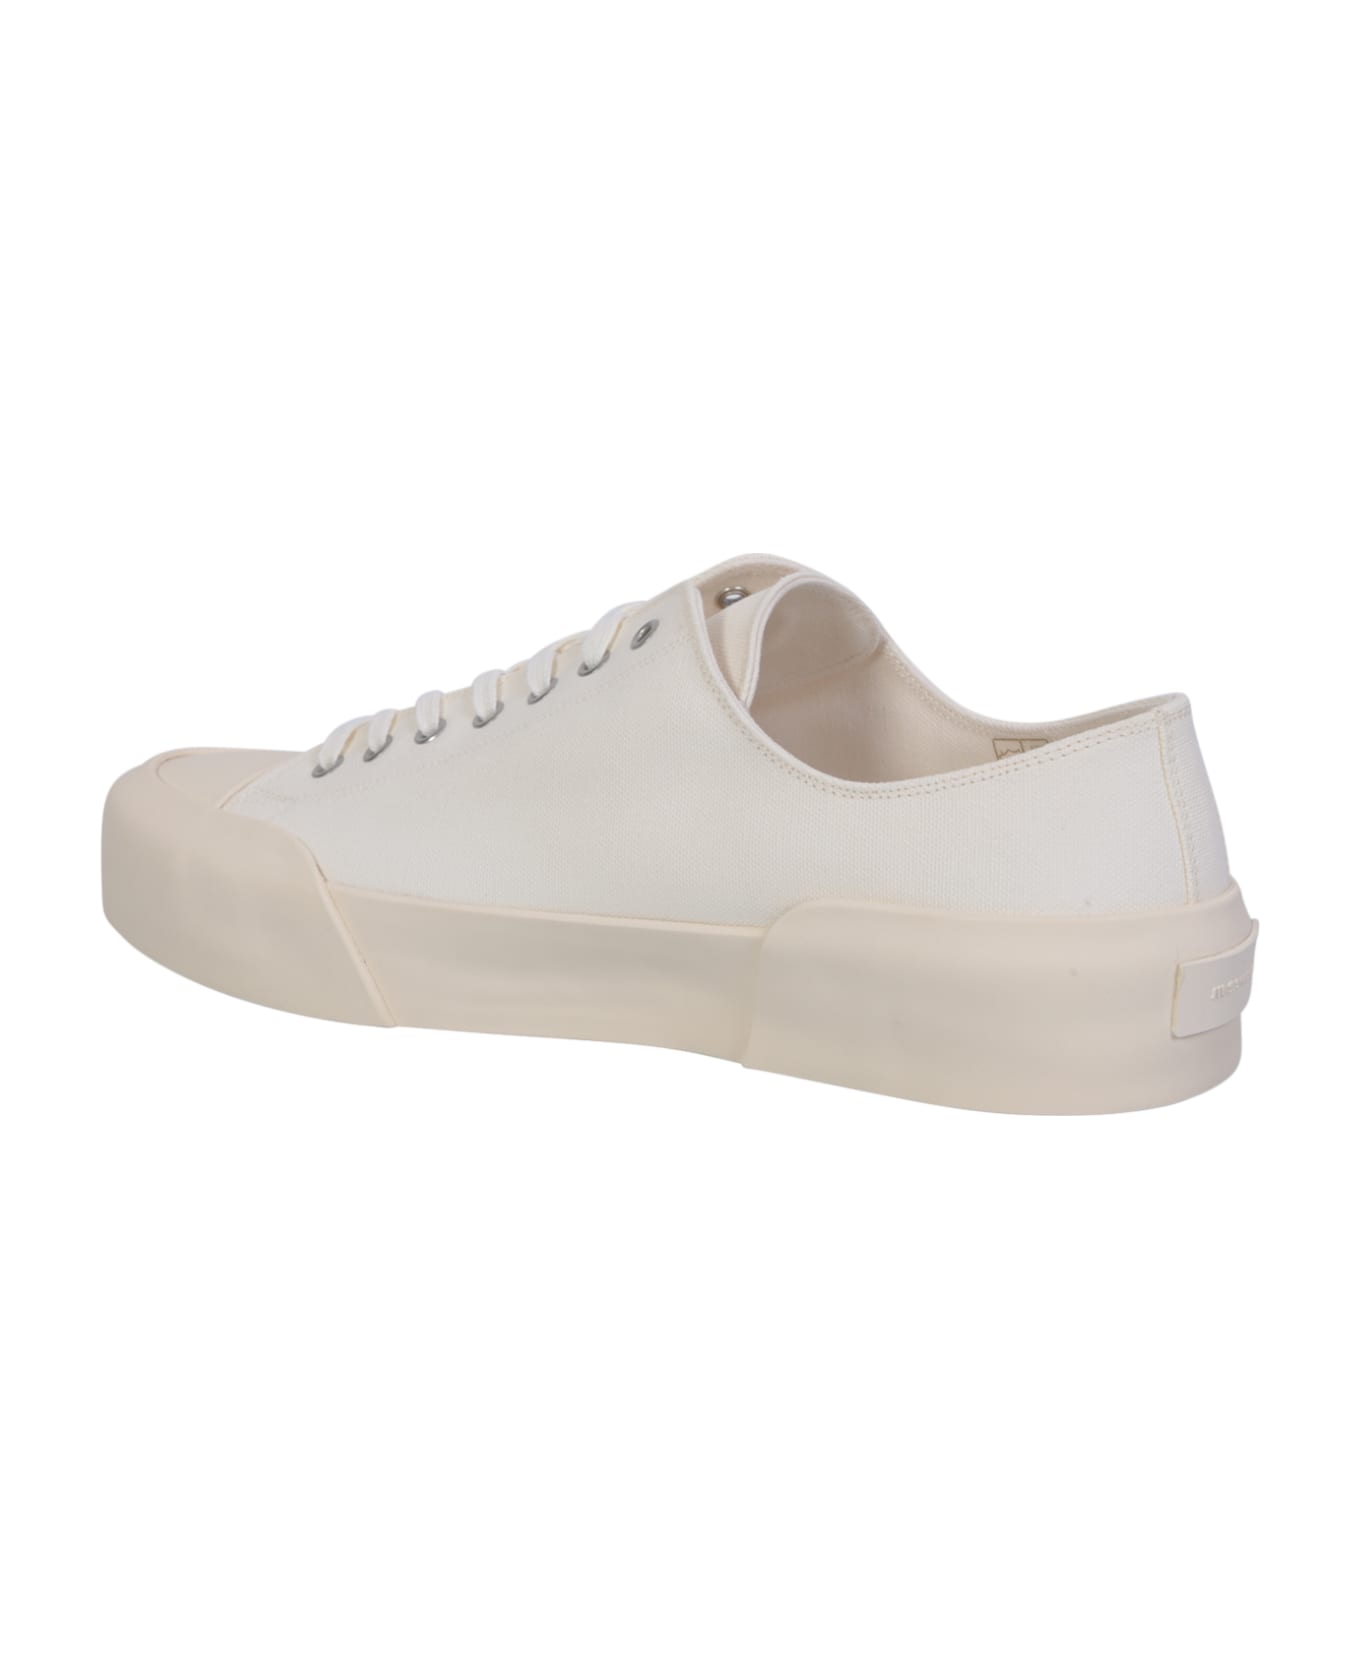 Jil Sander Lace-up Low White Sneakers - White スニーカー